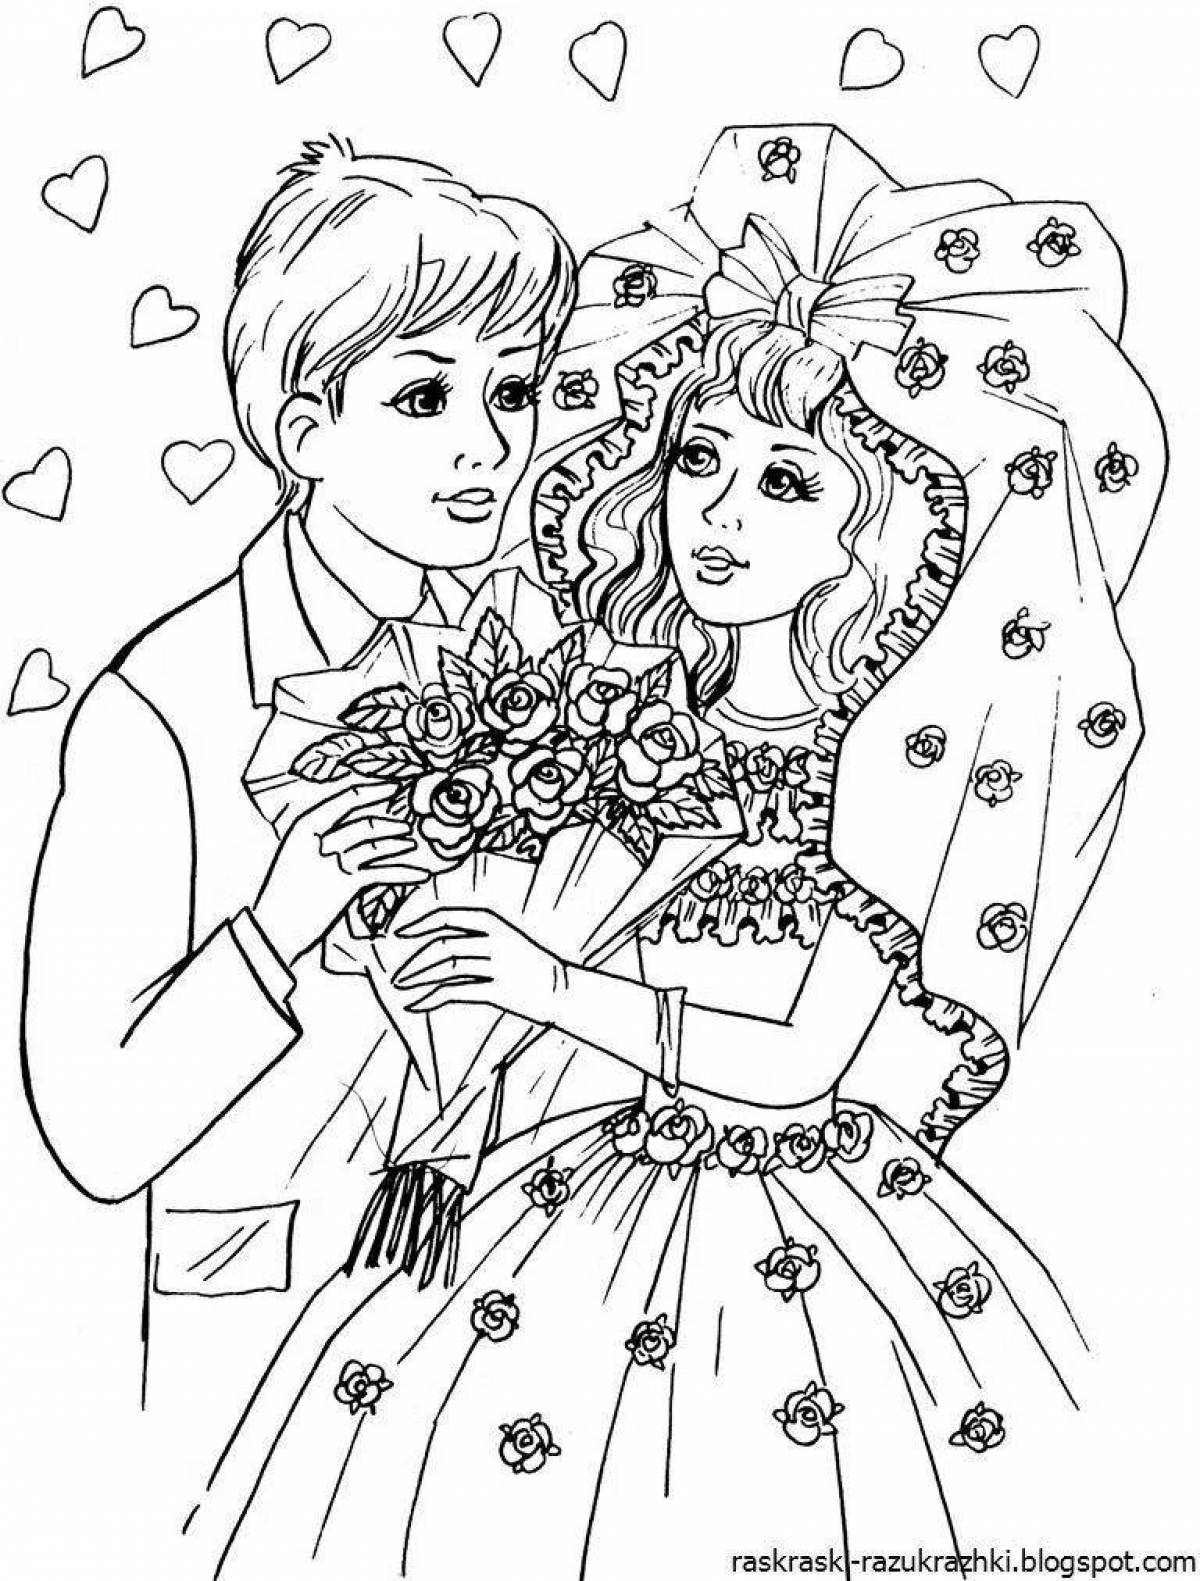 Fun coloring page 9 10 years old